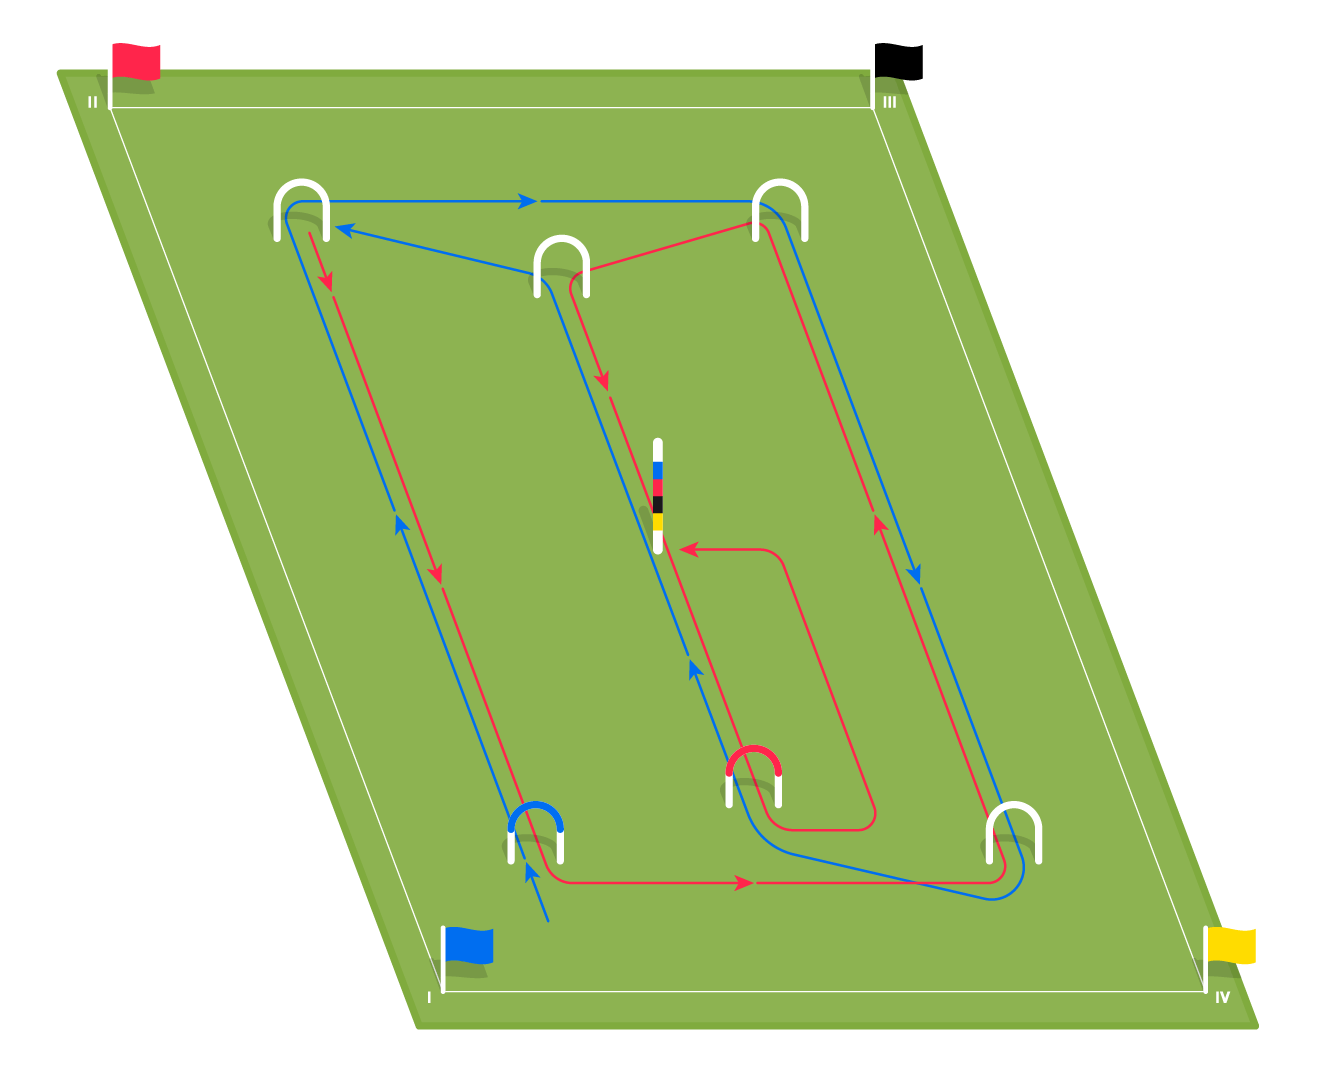 A graphic illustrating the direction of play of croquet